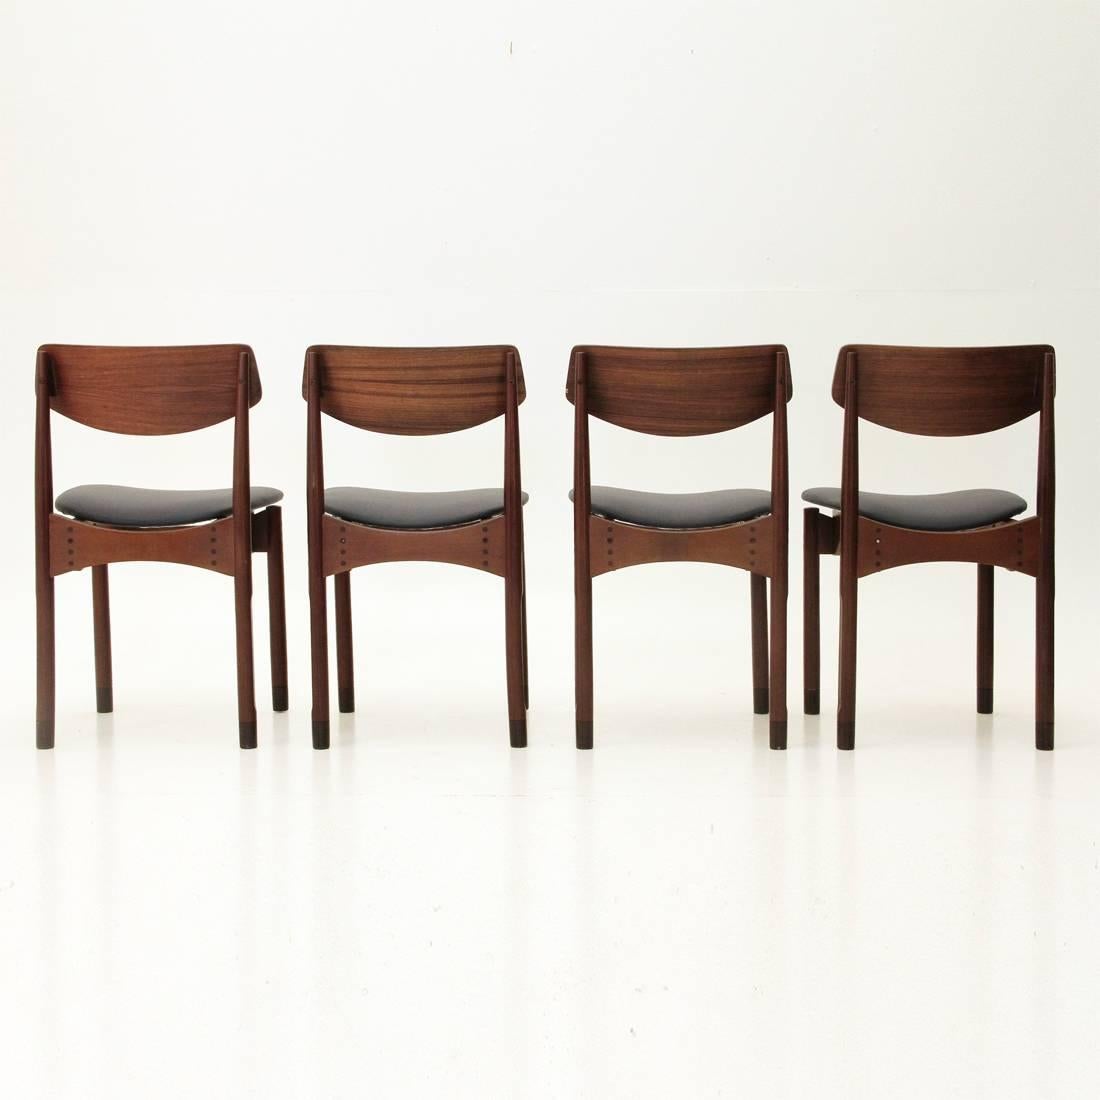 Mid-20th Century Italian Rosewood and Eco Leather Chairs, Set of Four, 1950s